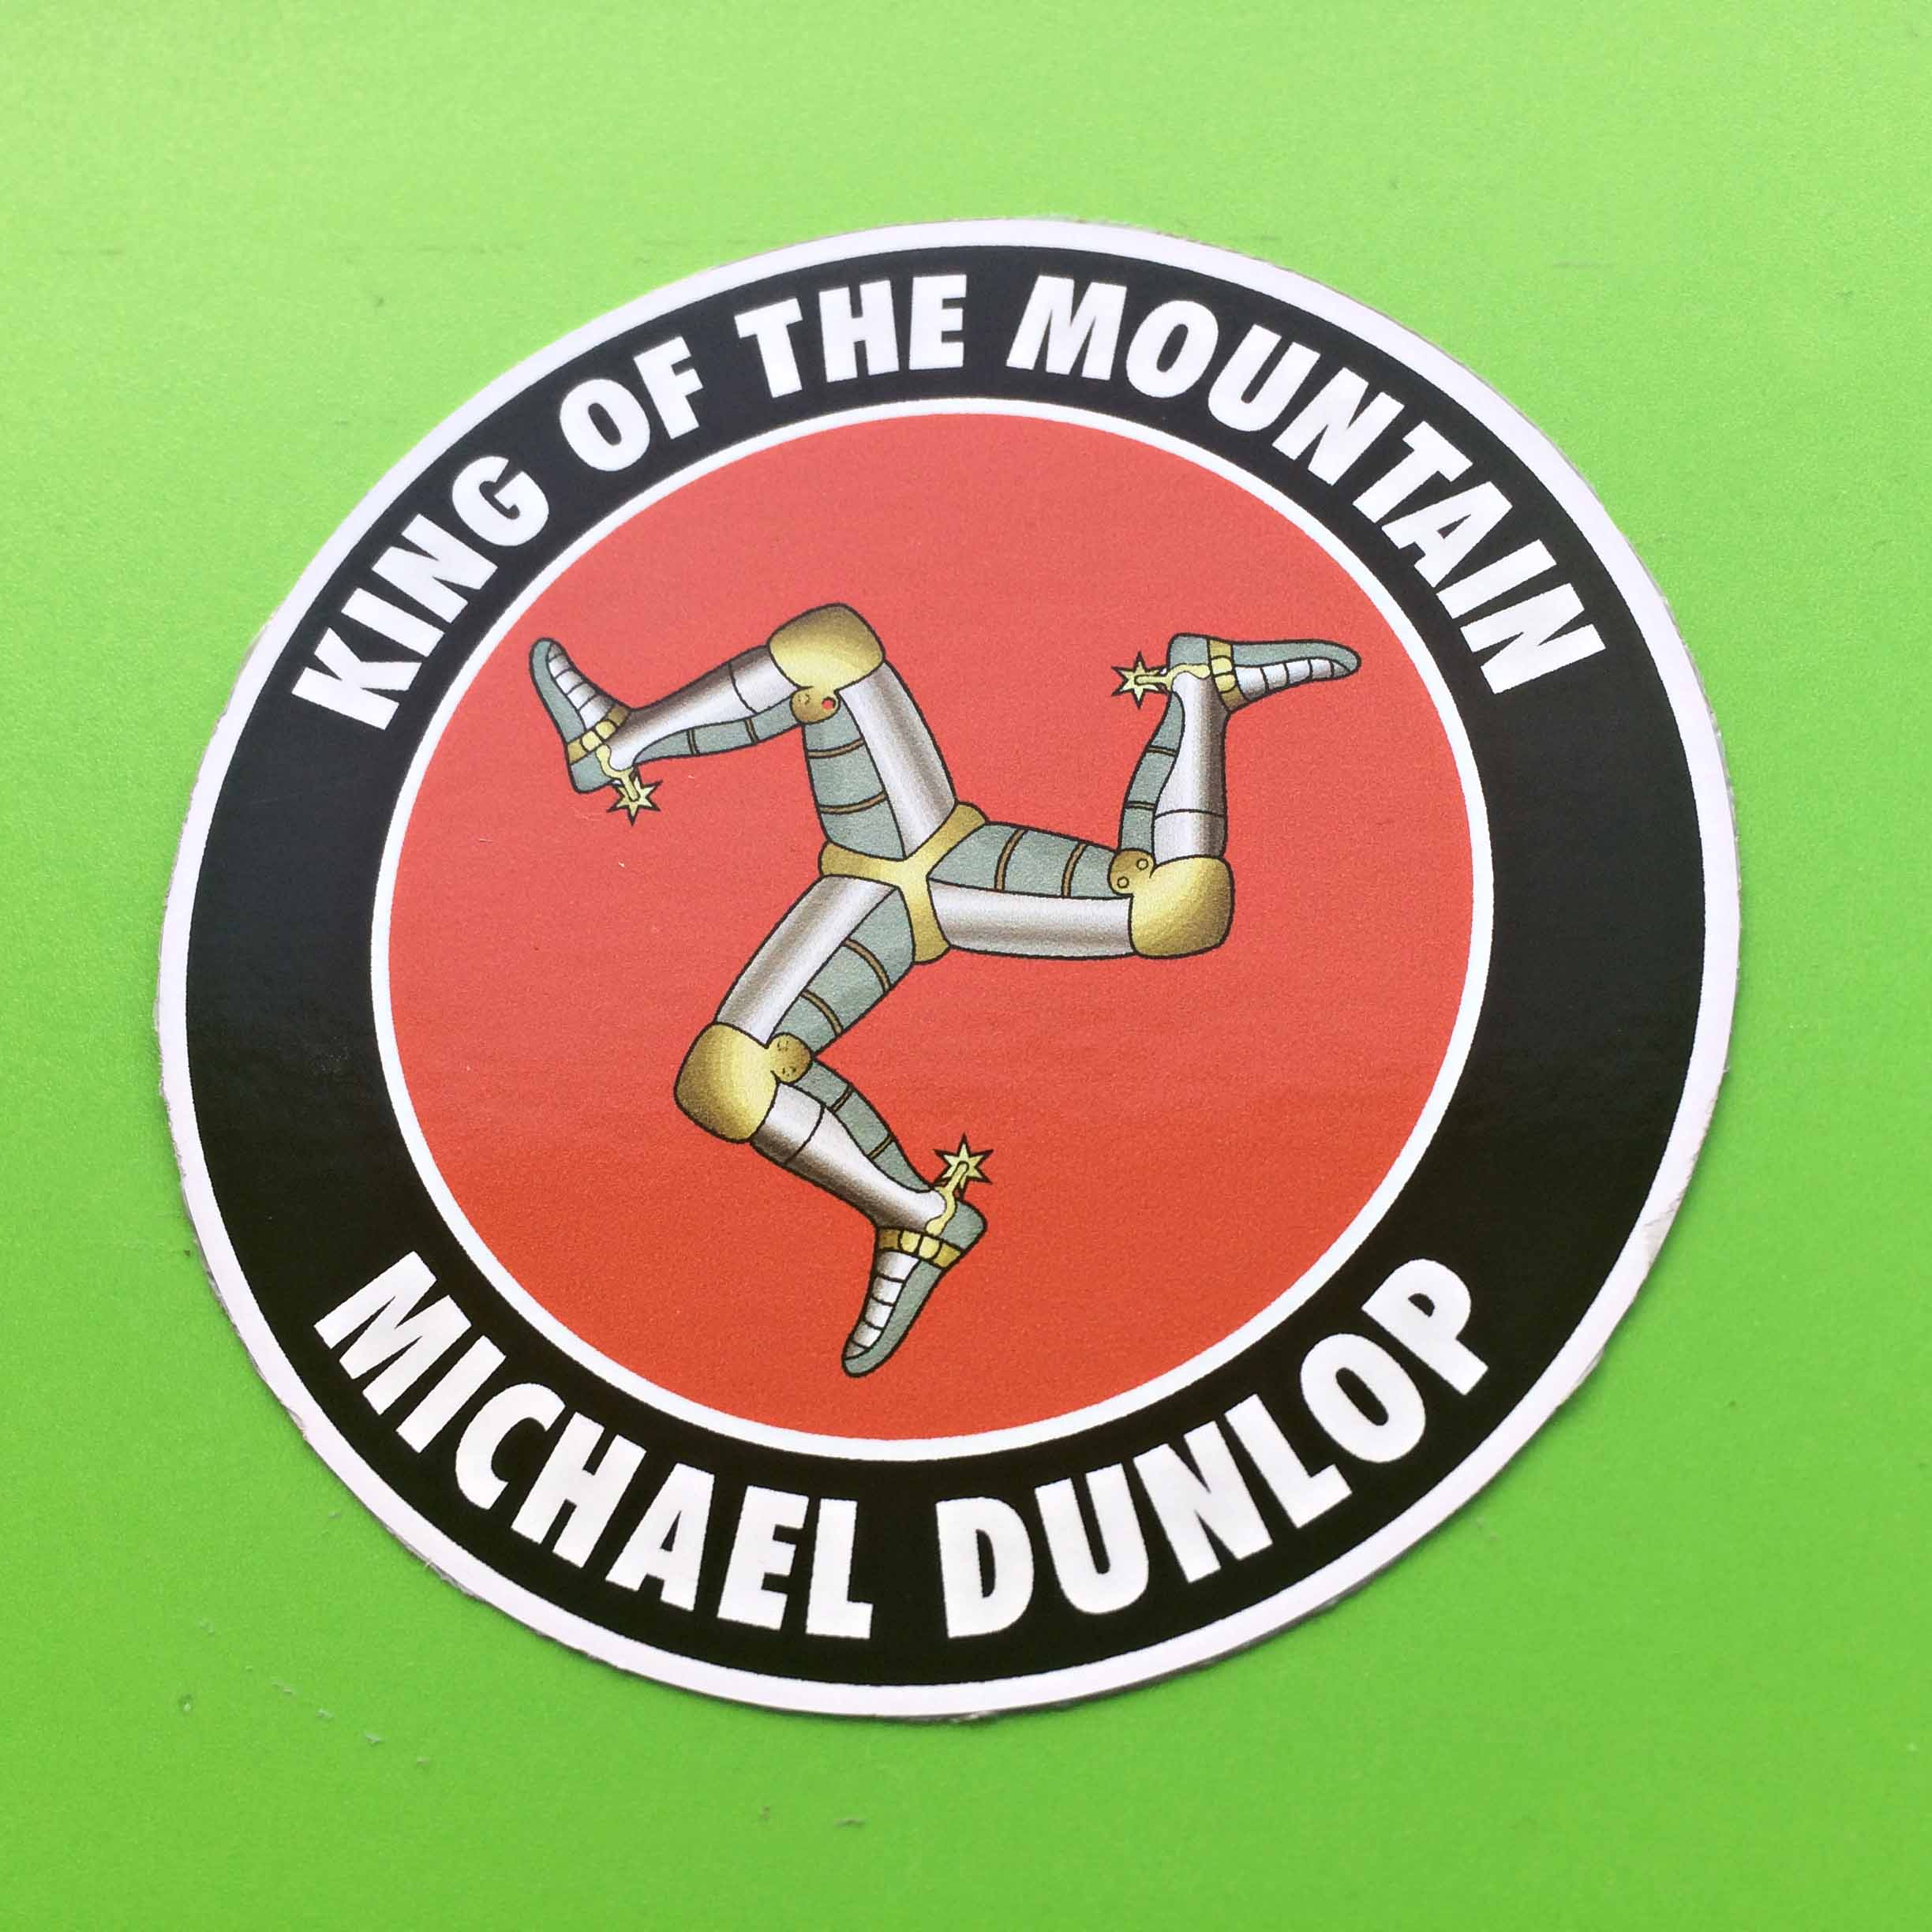 King Of The Mountain Michael Dunlop in white lettering on a black outer circle. A red inner circle contains the three armoured legs with golden spurs of the Isle of Man.